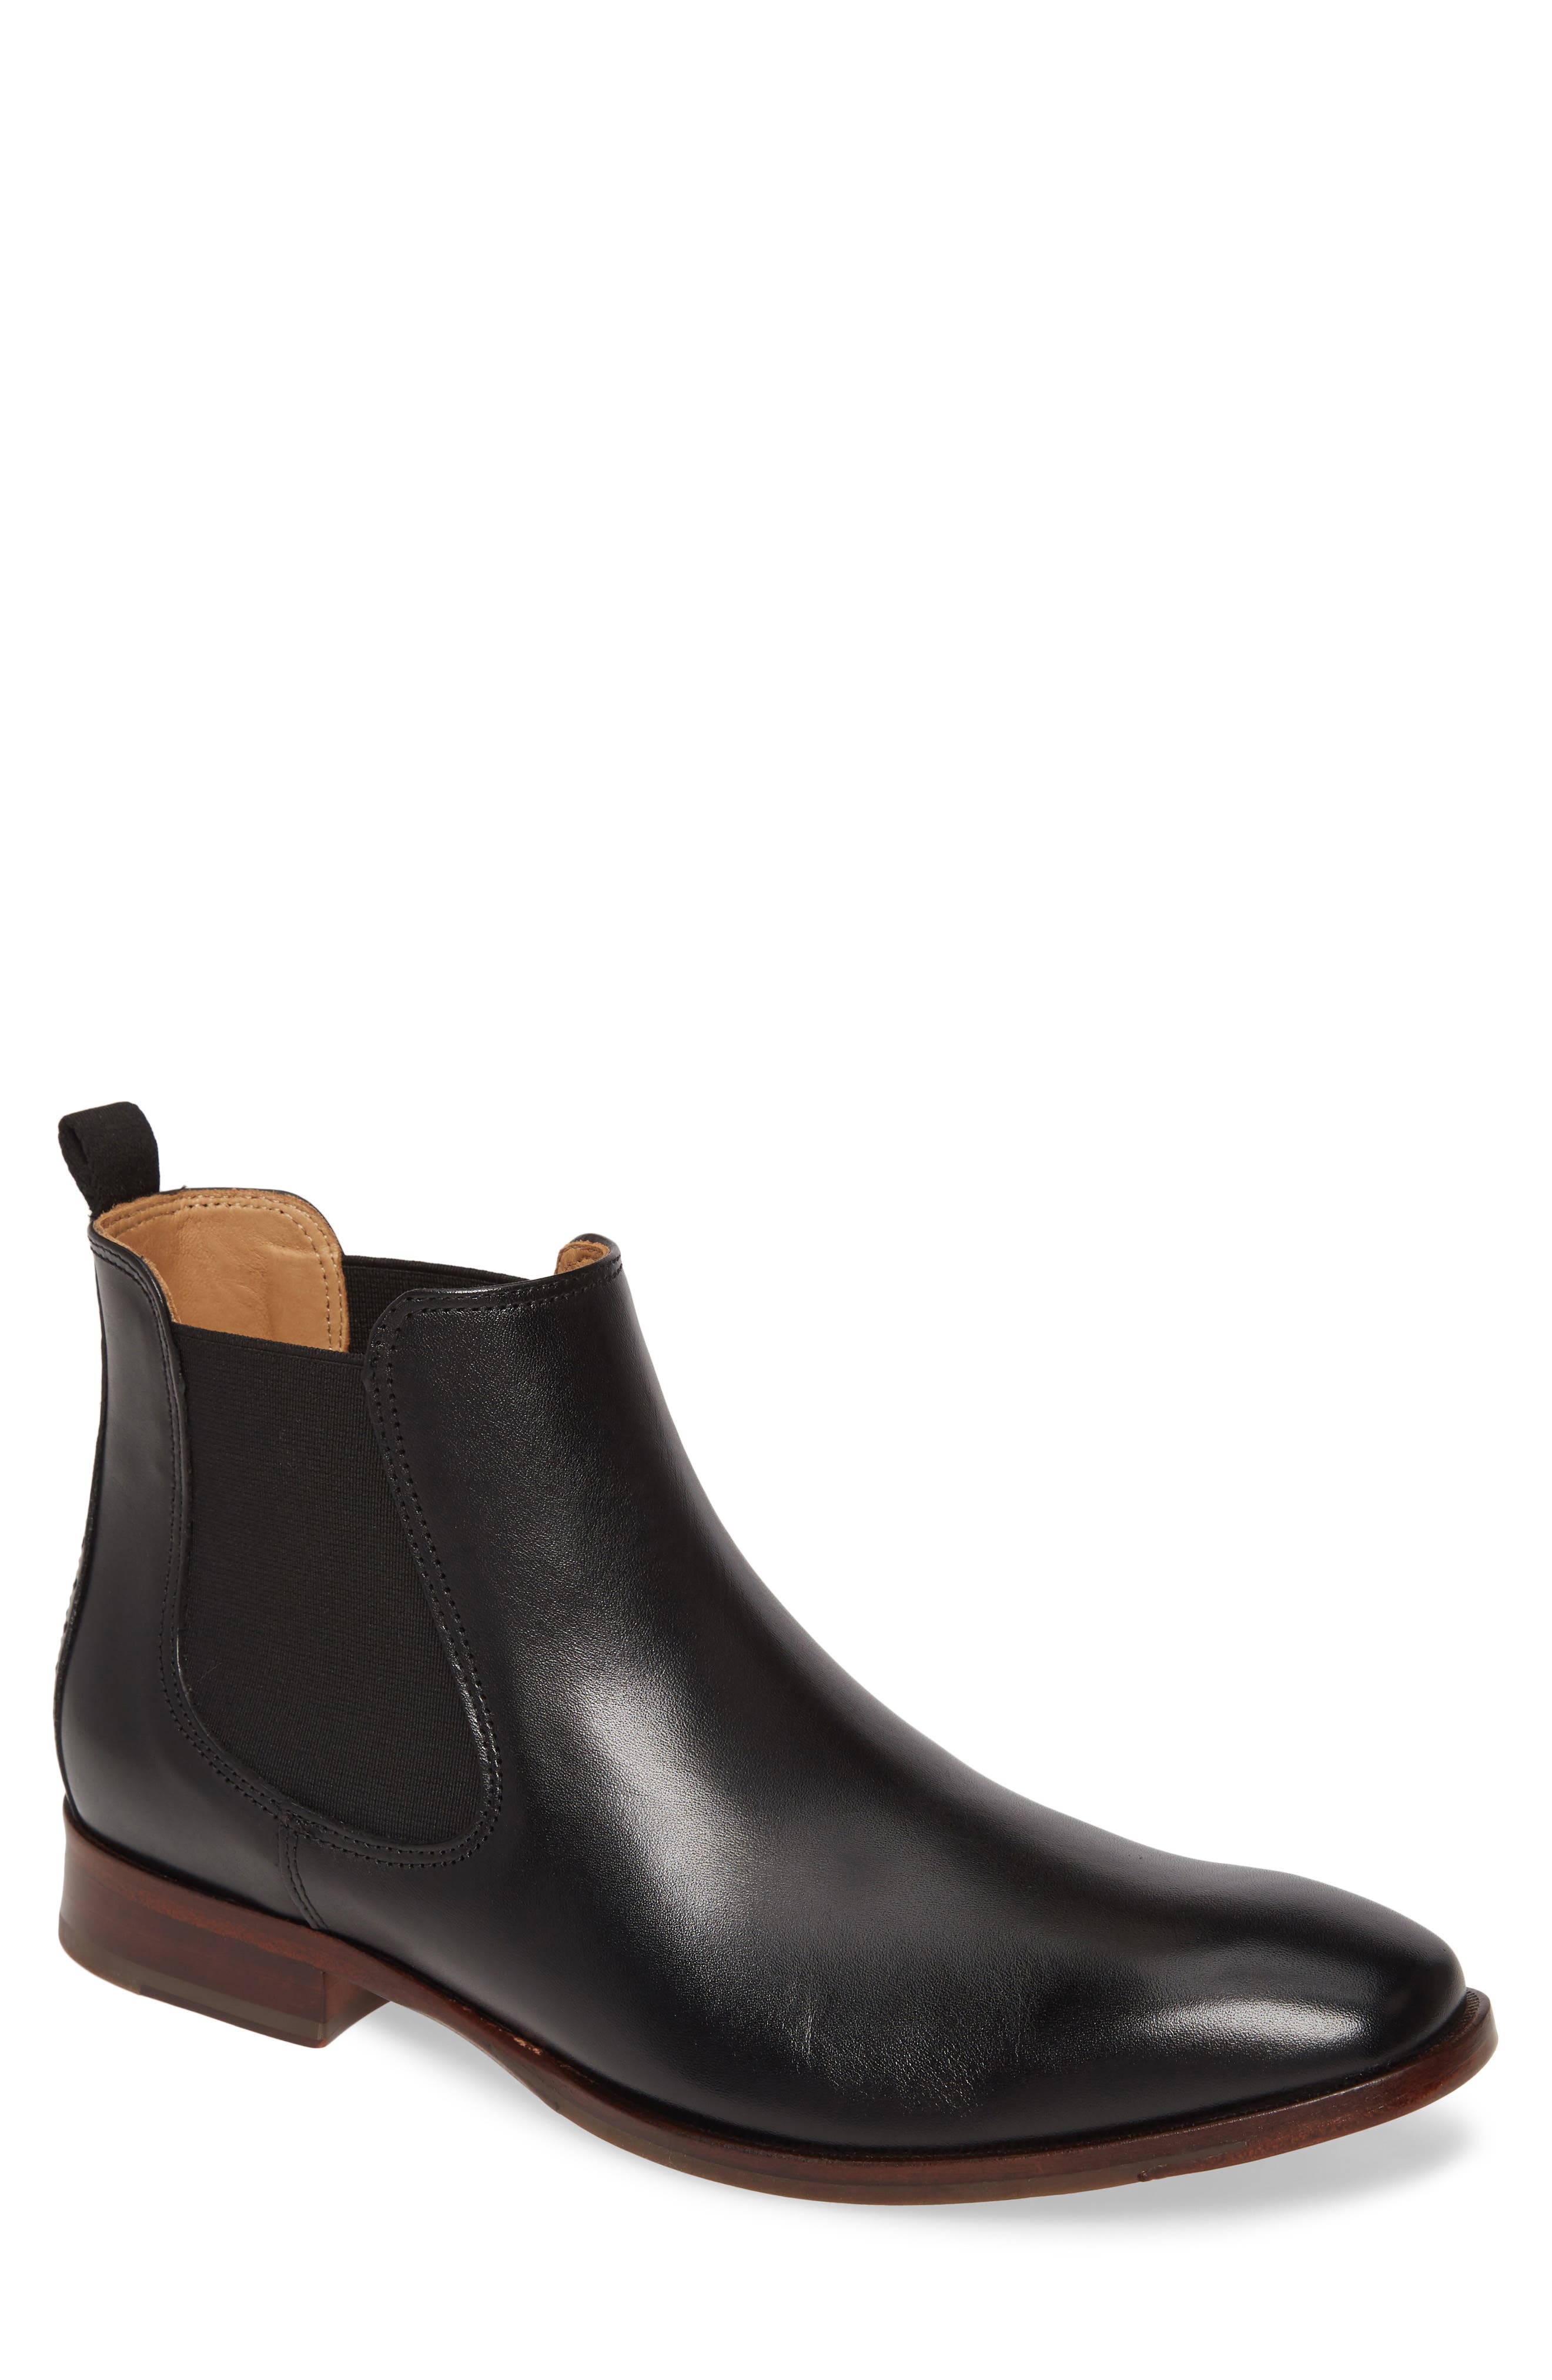 chelsea boots clearance